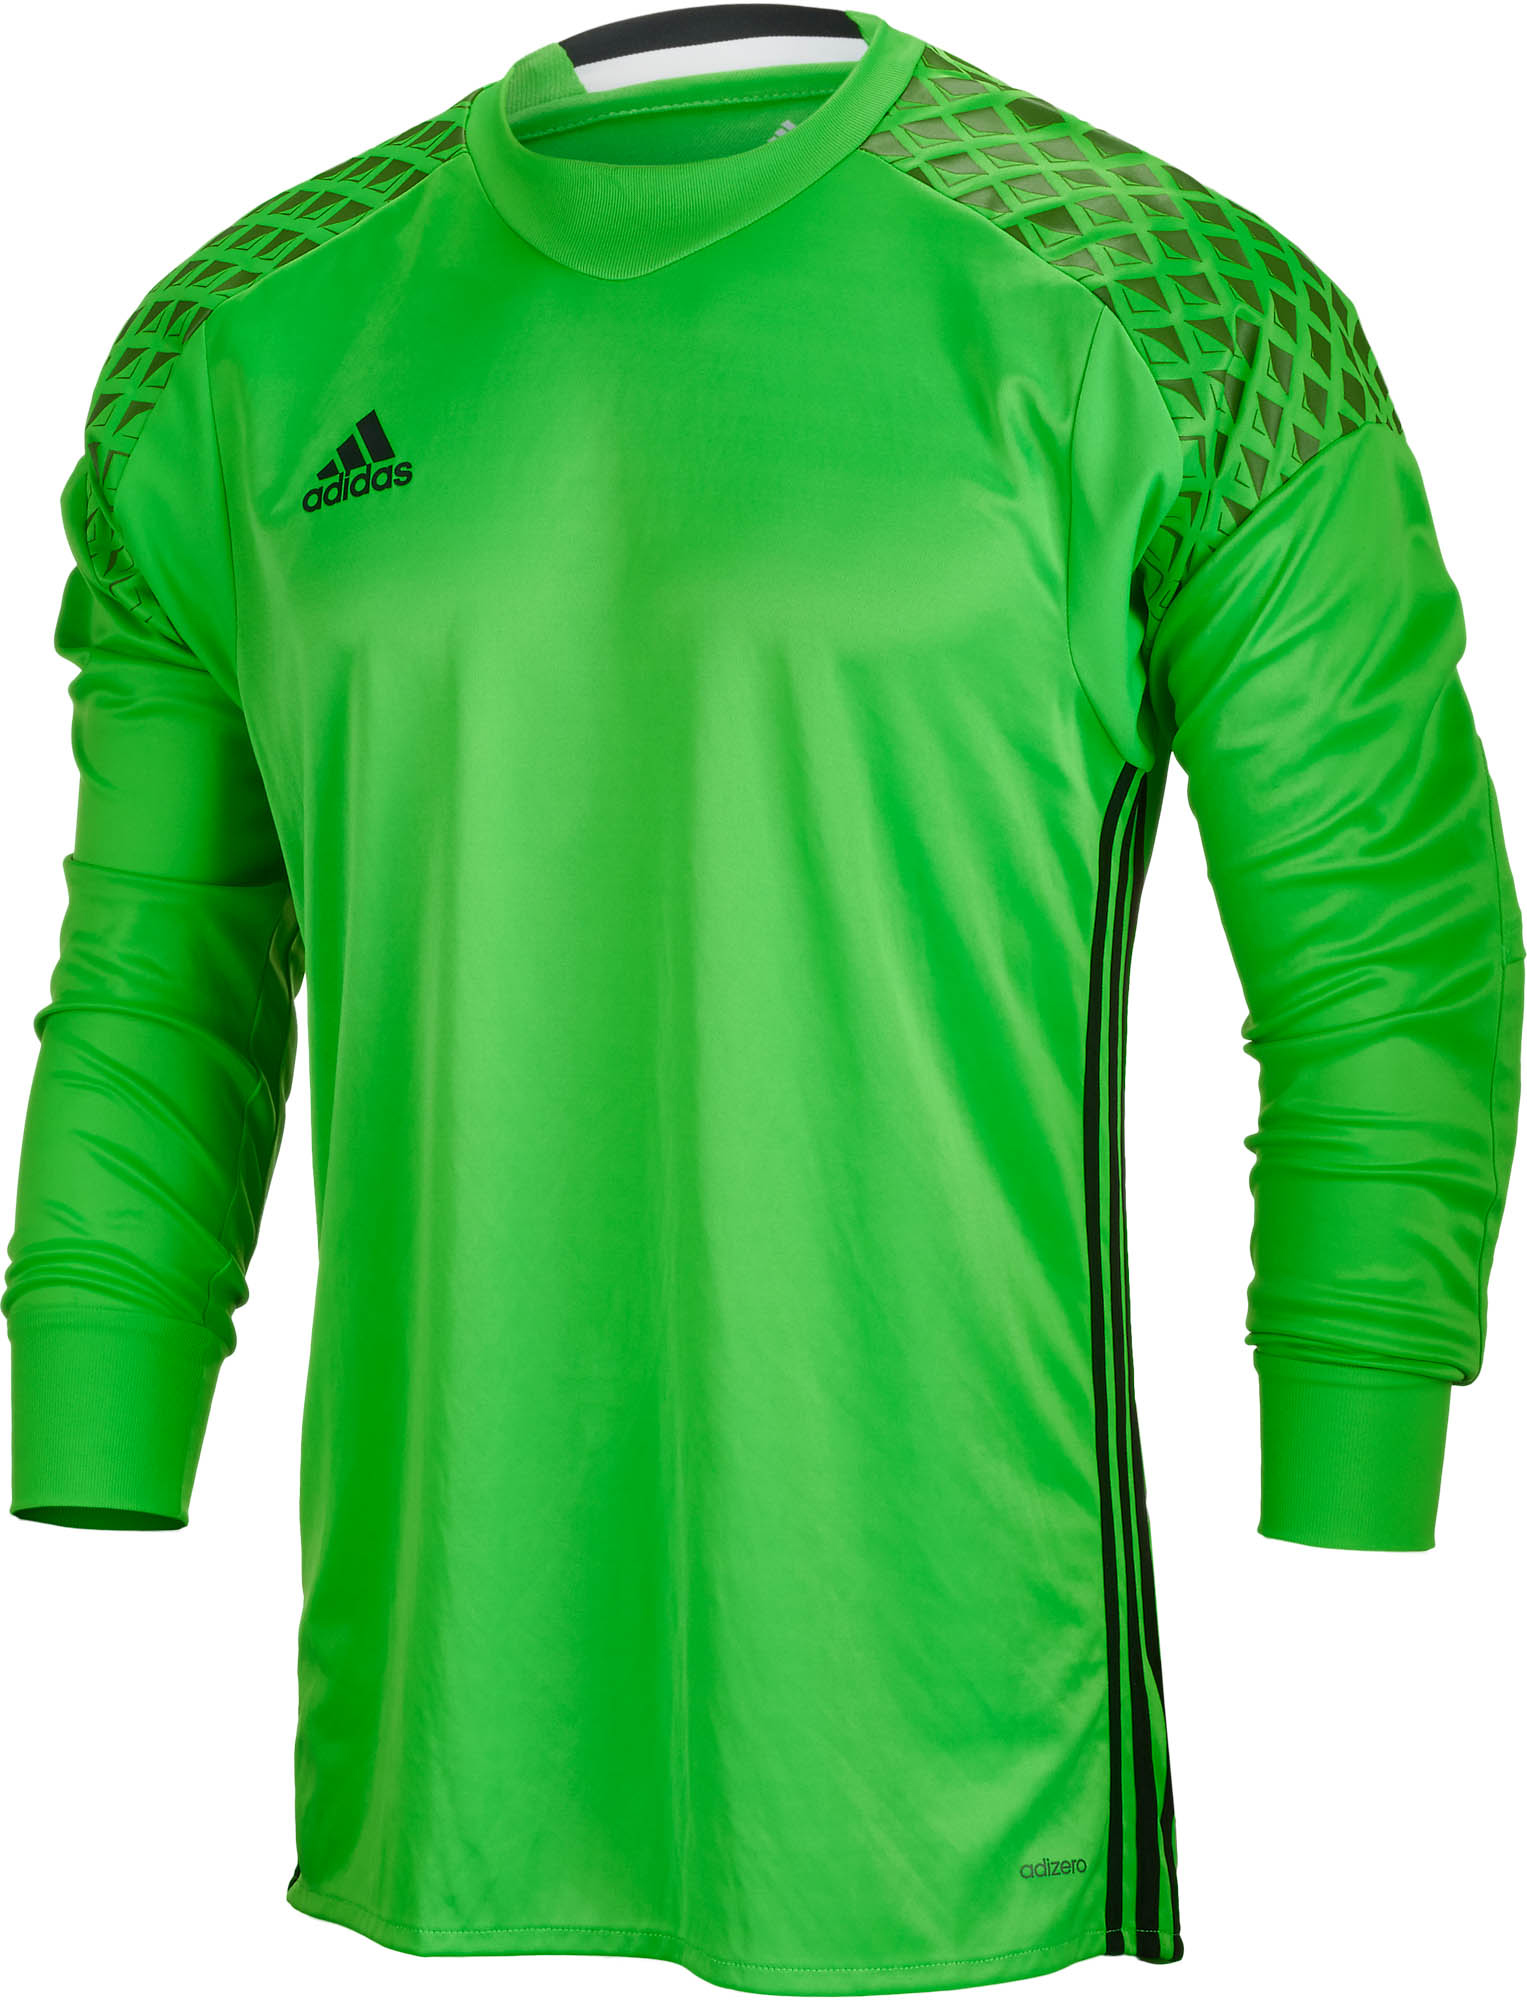 adidas youth soccer goalie jersey online